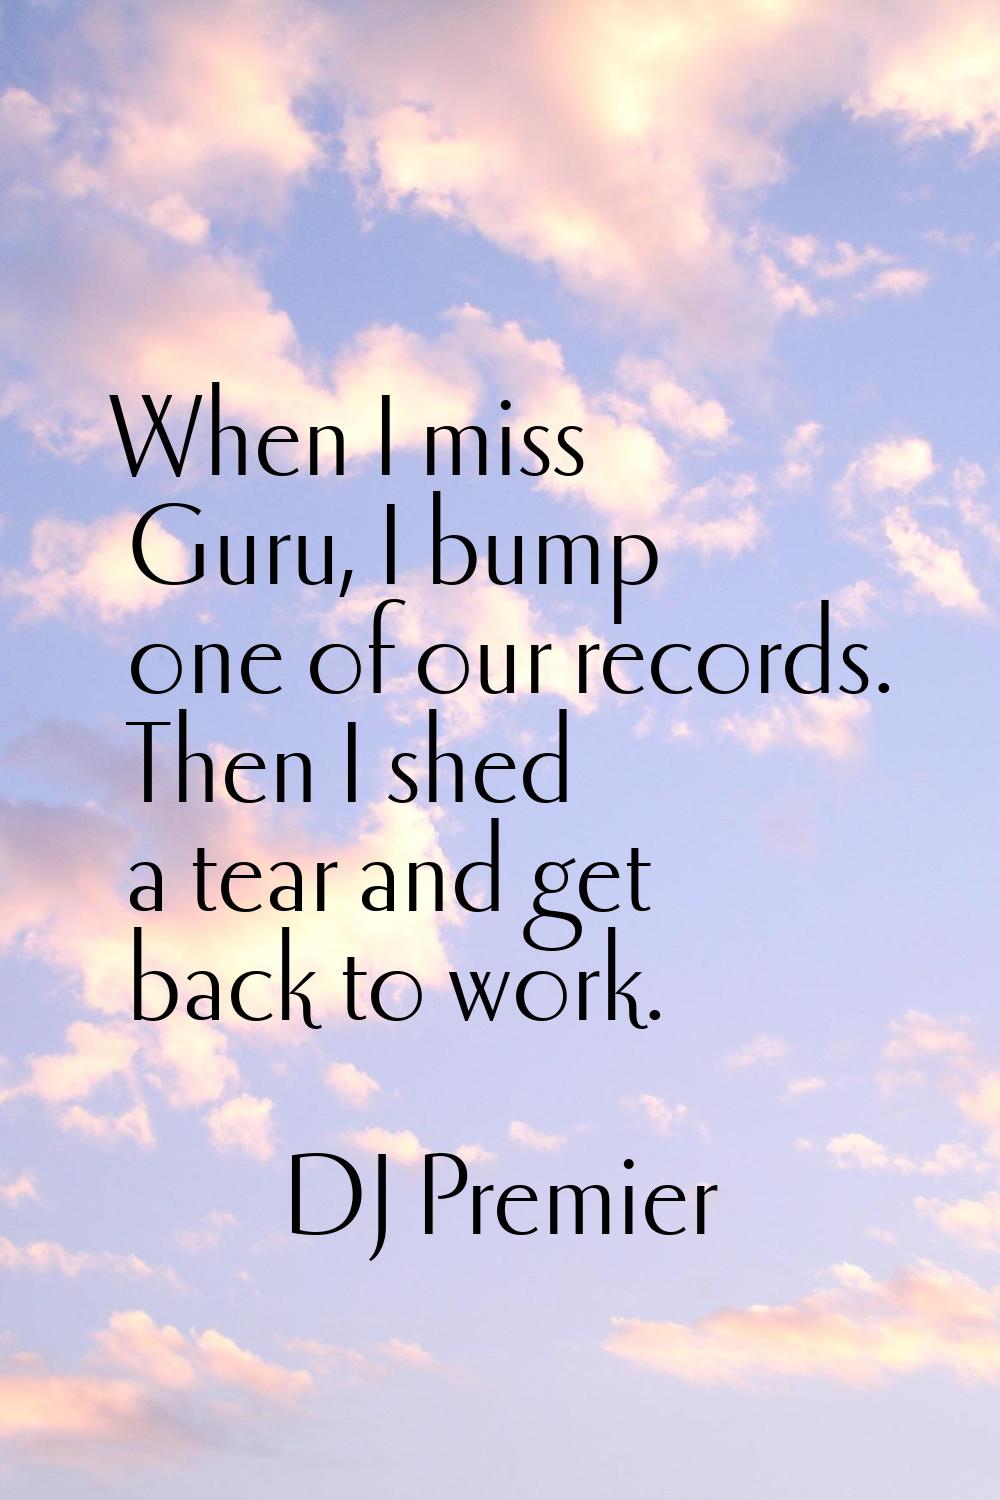 When I miss Guru, I bump one of our records. Then I shed a tear and get back to work.